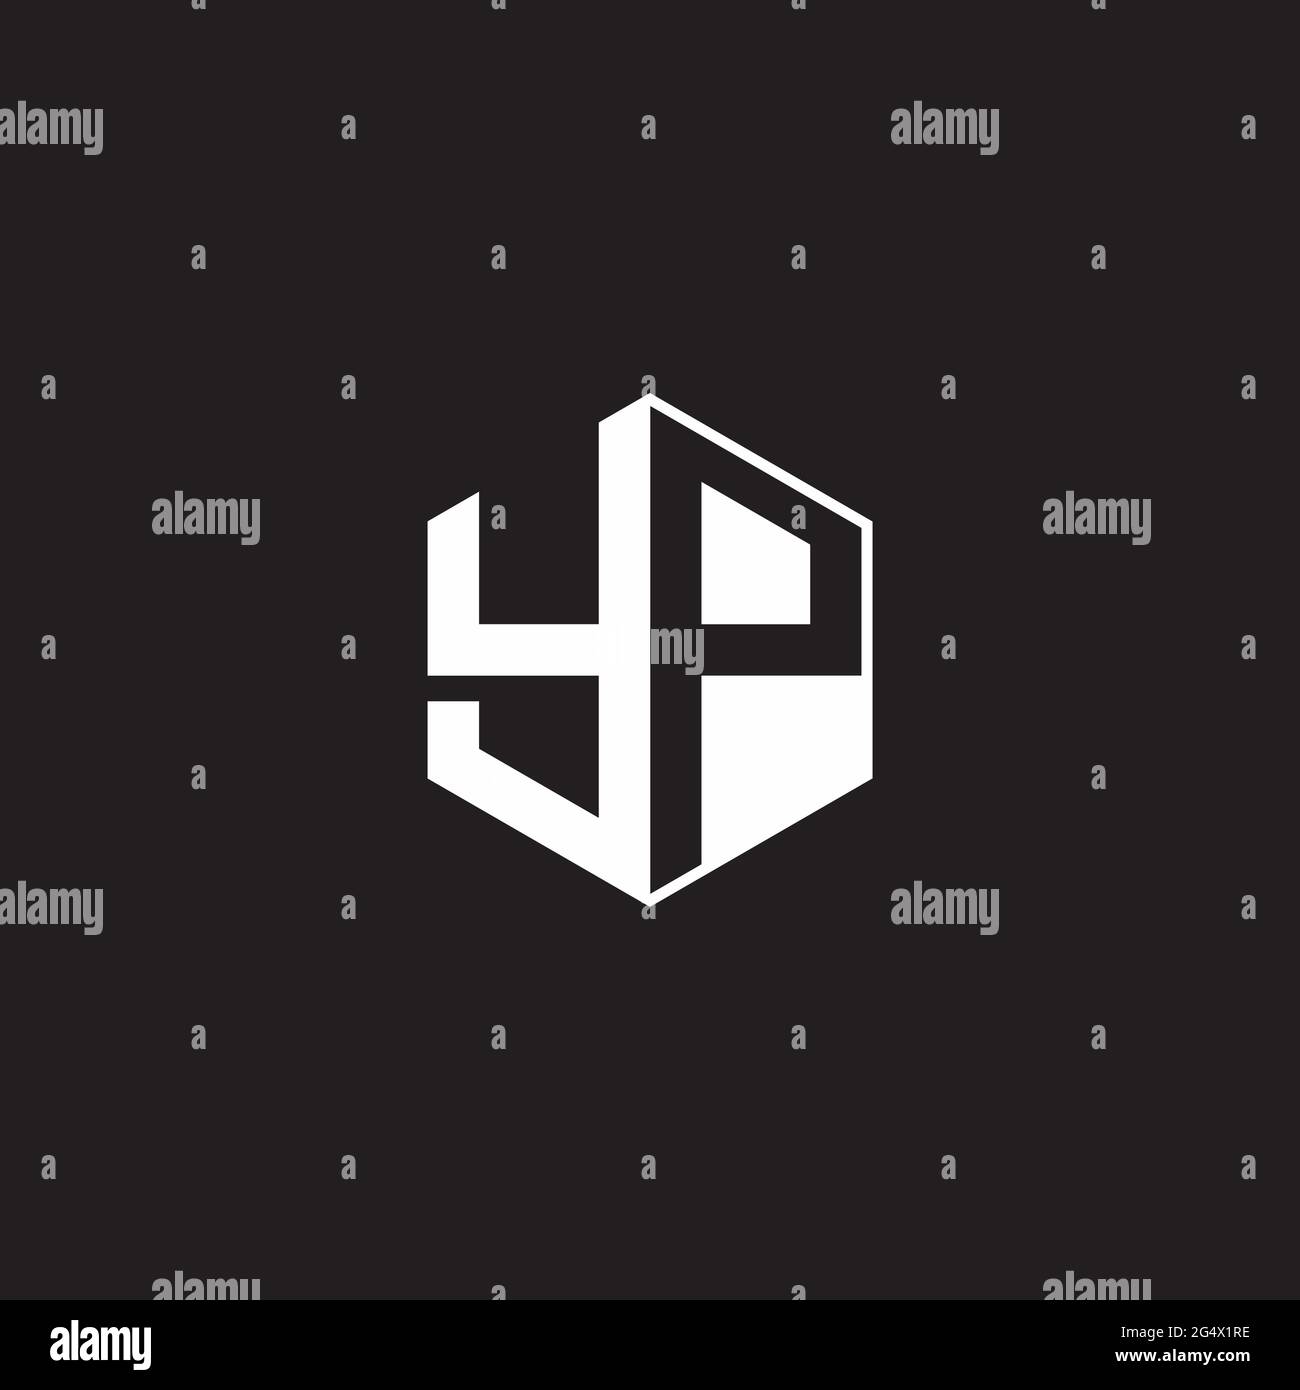 YP Y P PY Logo monogram hexagon with black background negative space style Stock Vector